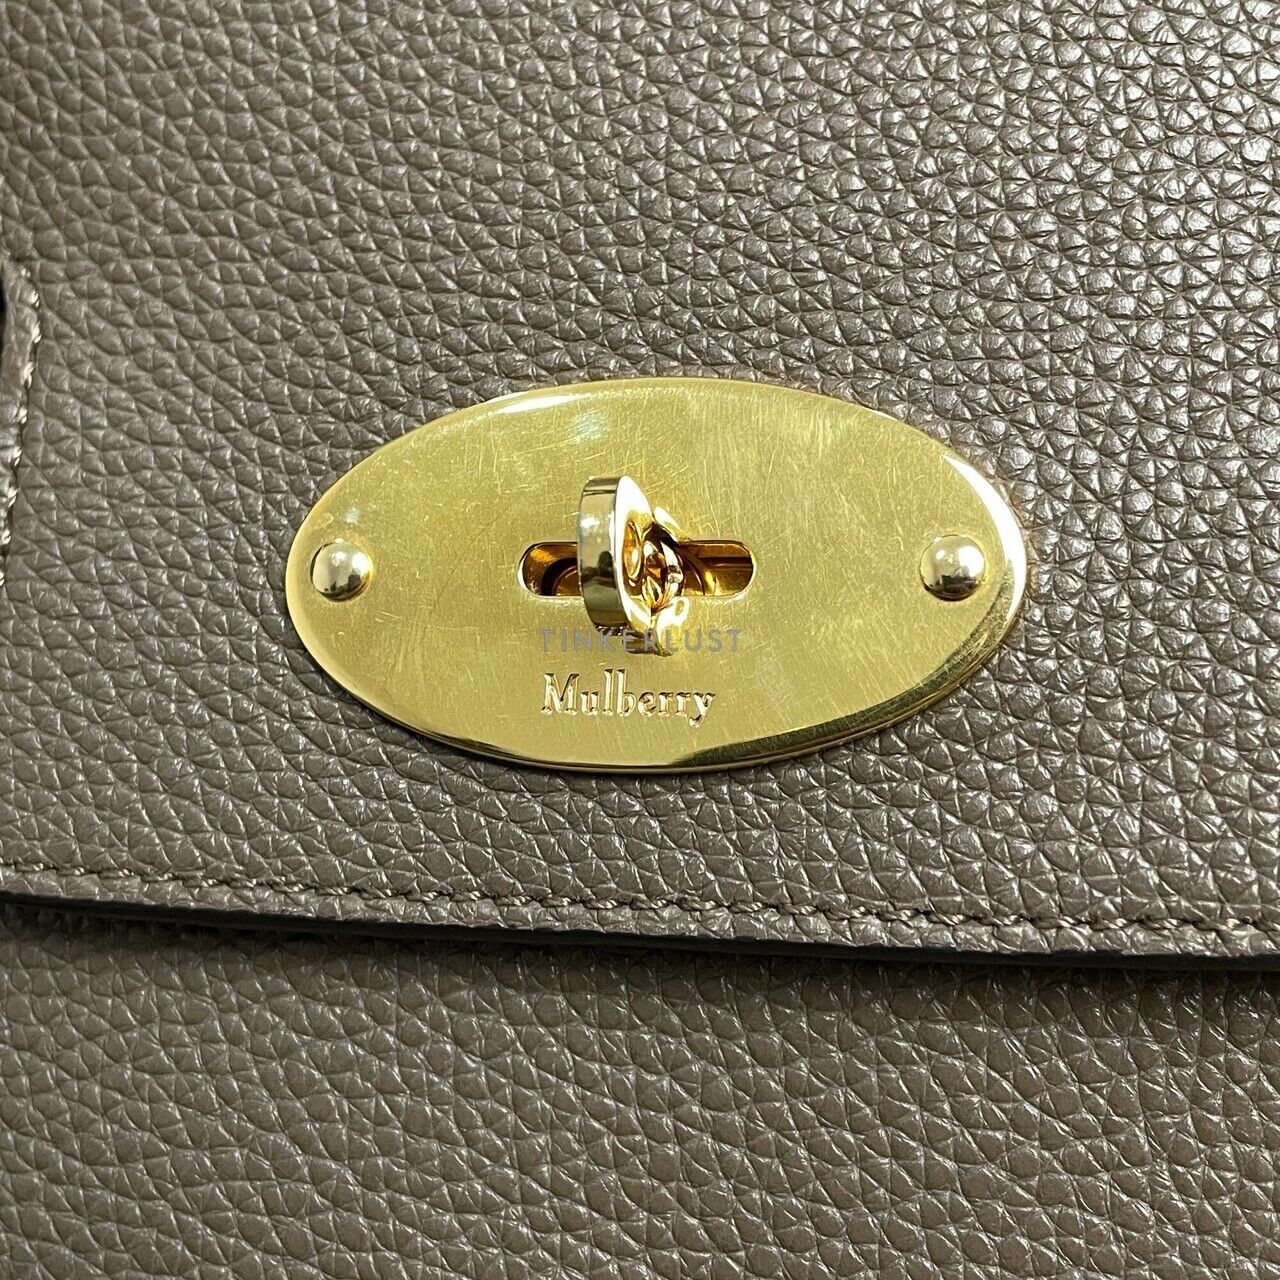 Mulberry Bayswater Taupe Grained Leather GHW Handbag